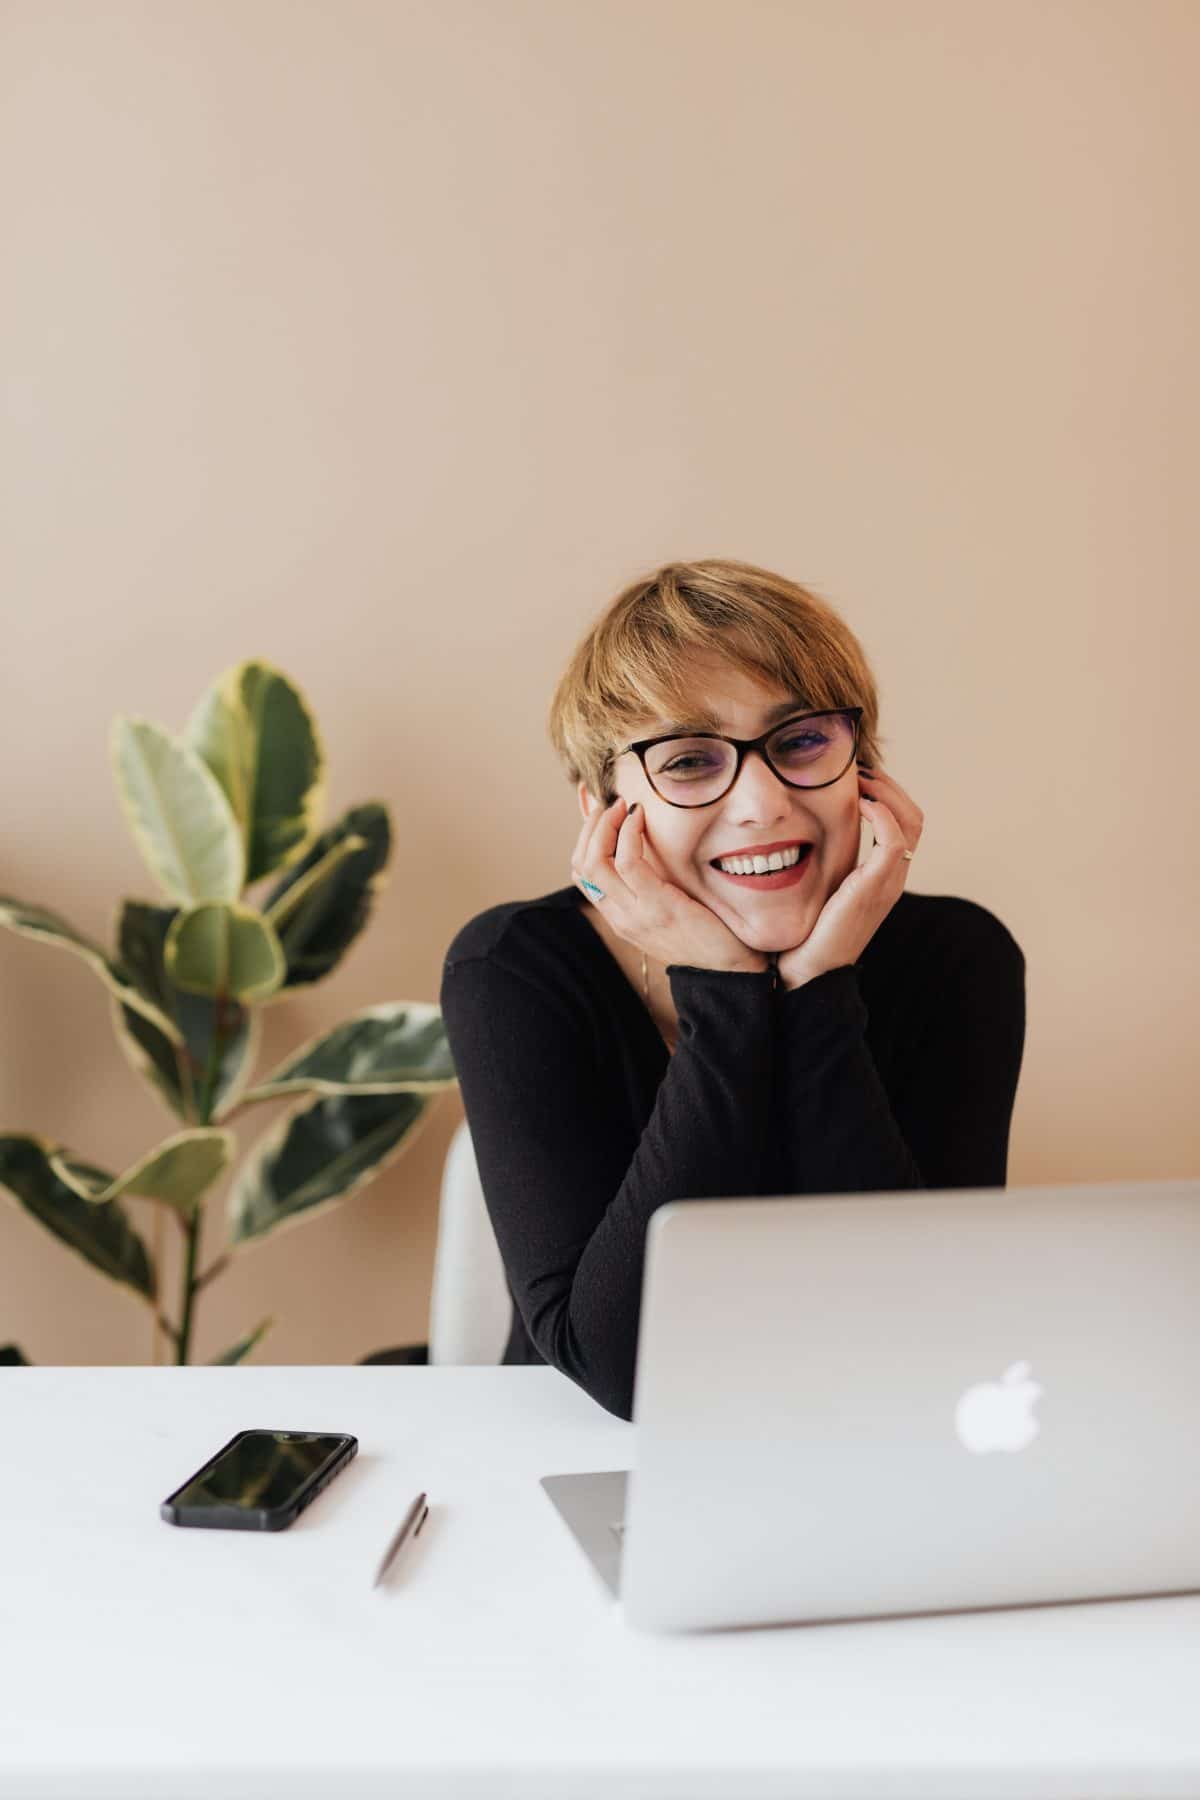 Young short-haired professional woman with glasses sits in front of her laptop. She is holding her head in her hands and is smiling.